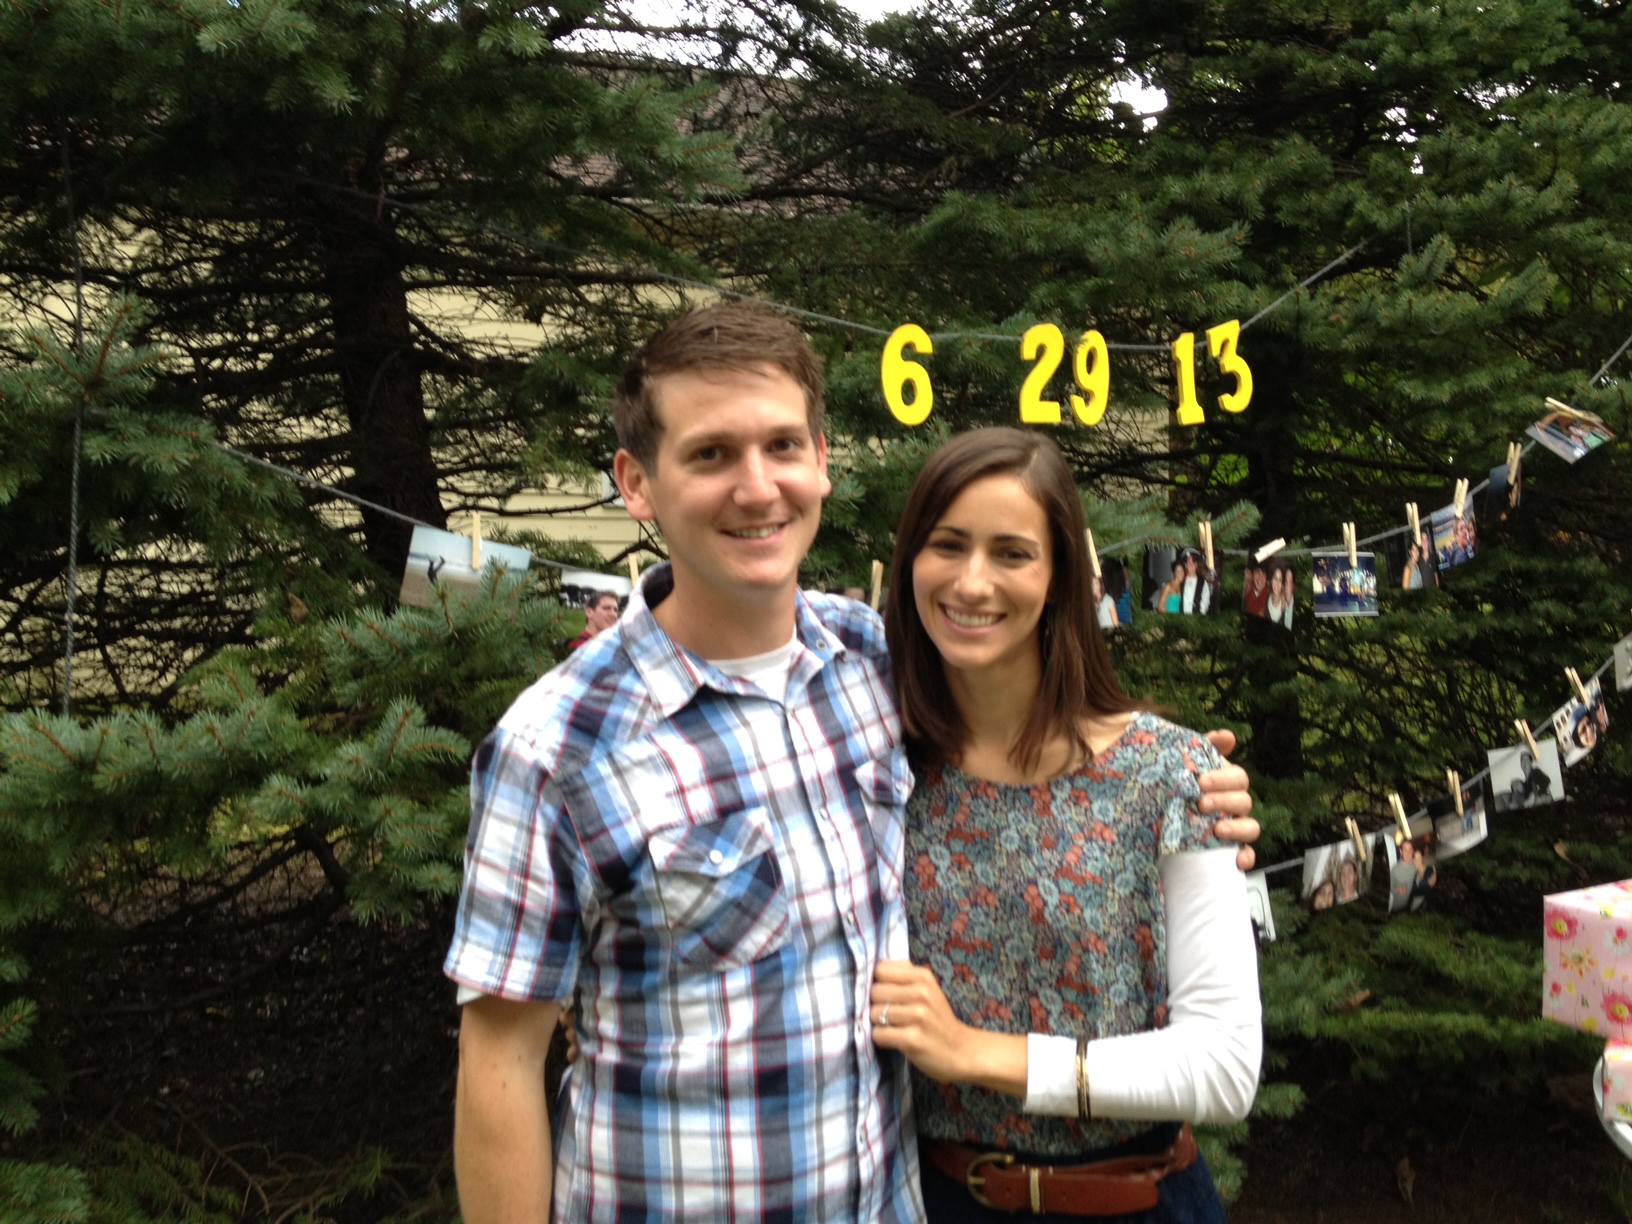 Bride-to-be Blogger Kristy: Celebrating Eric’s Birthday—And Us! 